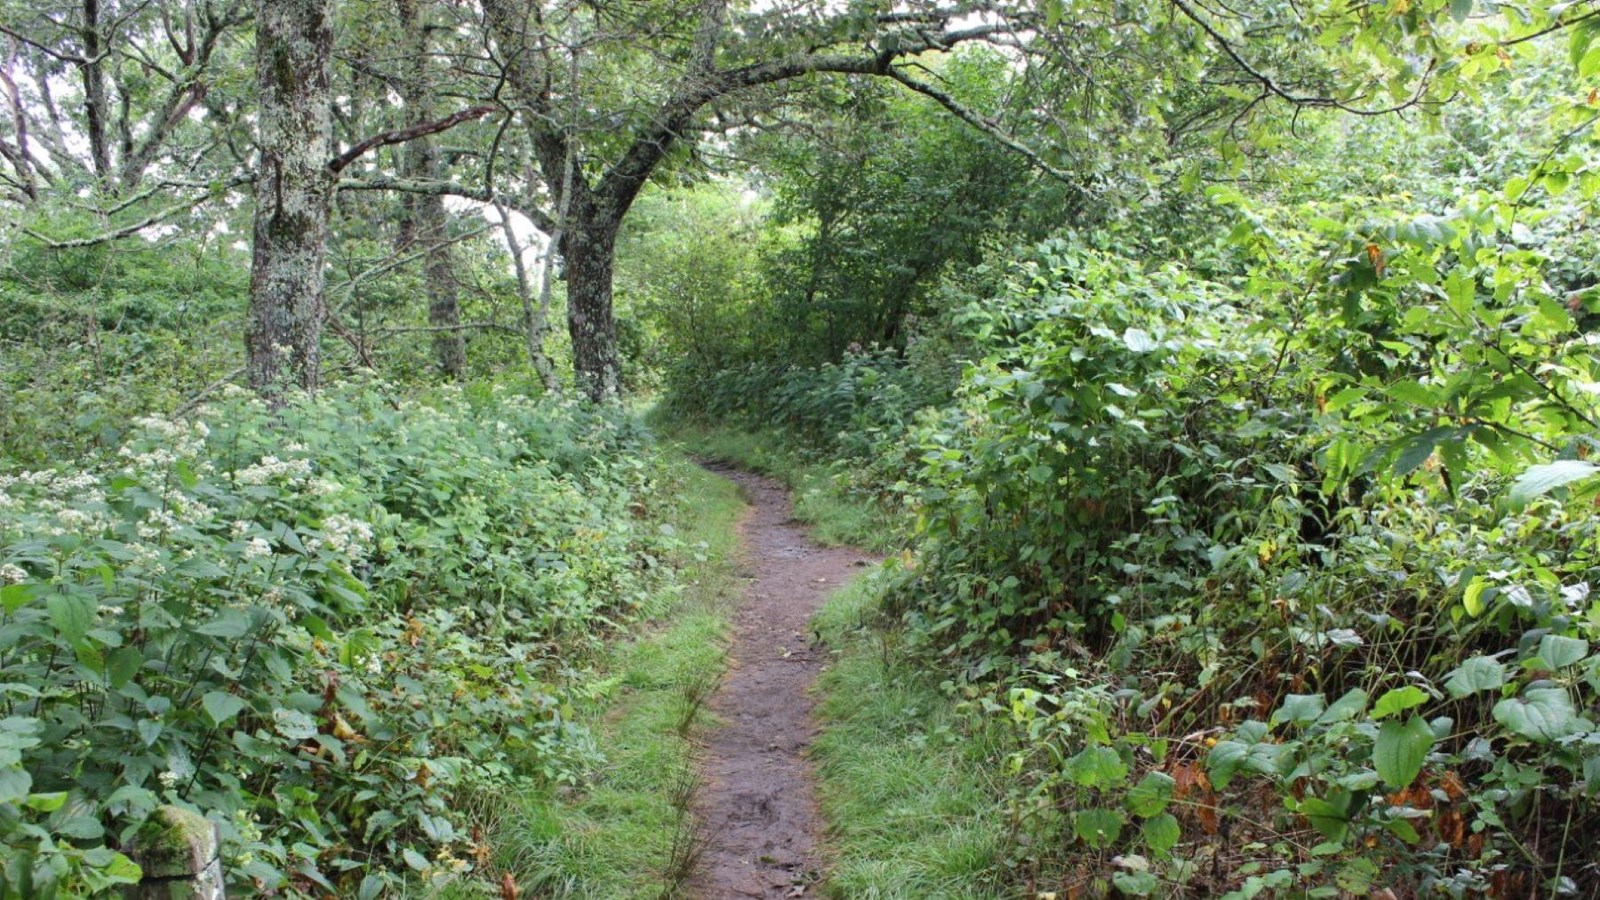 A narrow dirt trail passes through lush green forest of flowers, shrubs, and trees.